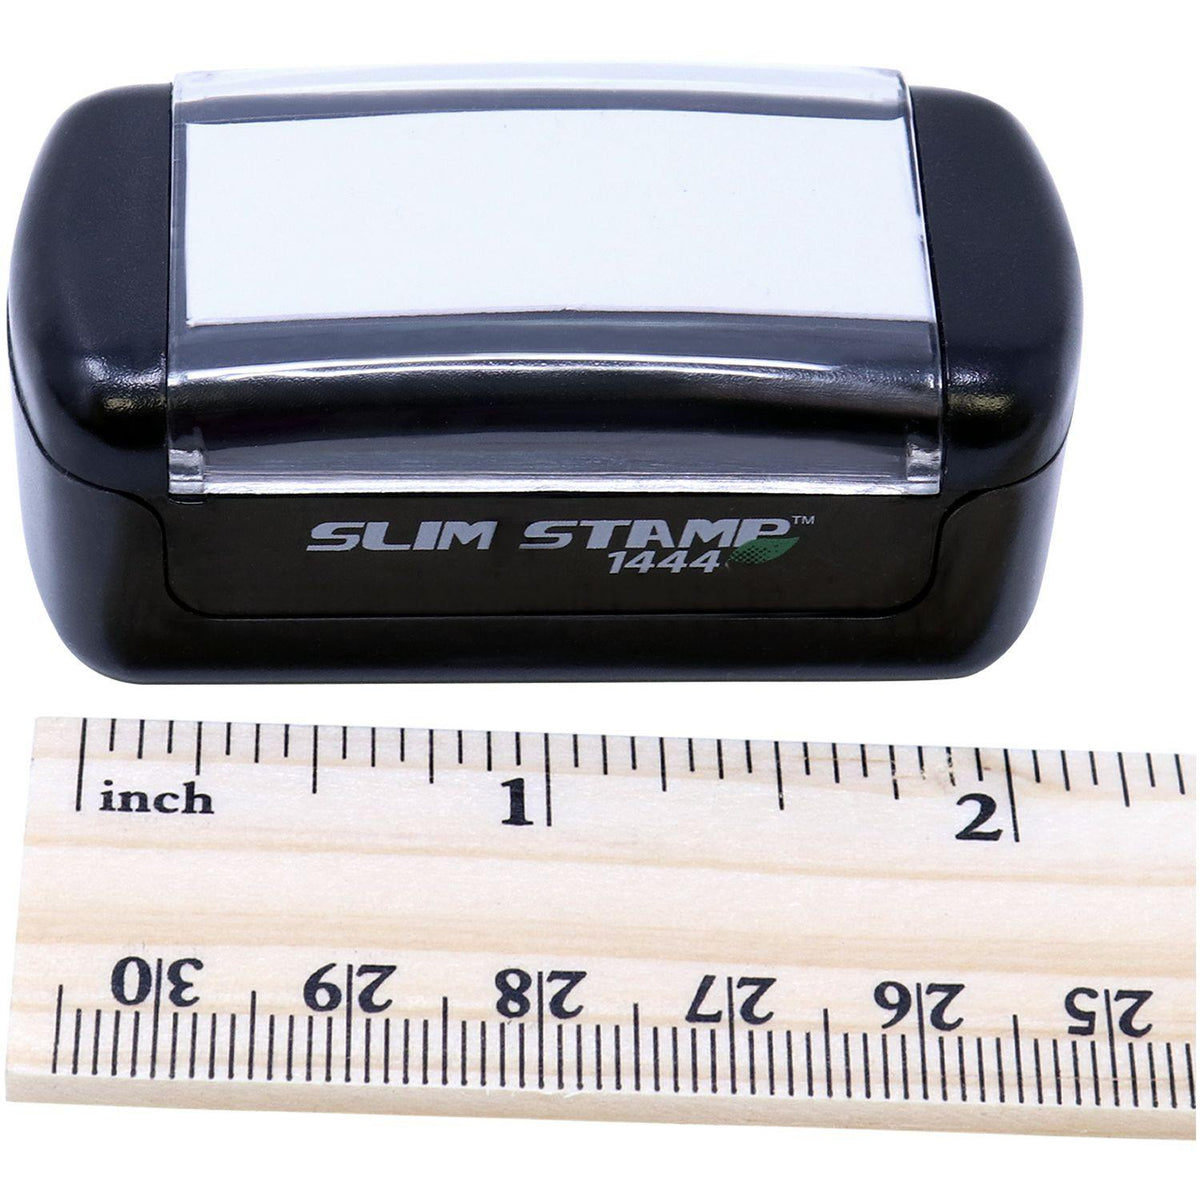 Measurement Slim Pre-Inked Expreso Stamp with Ruler